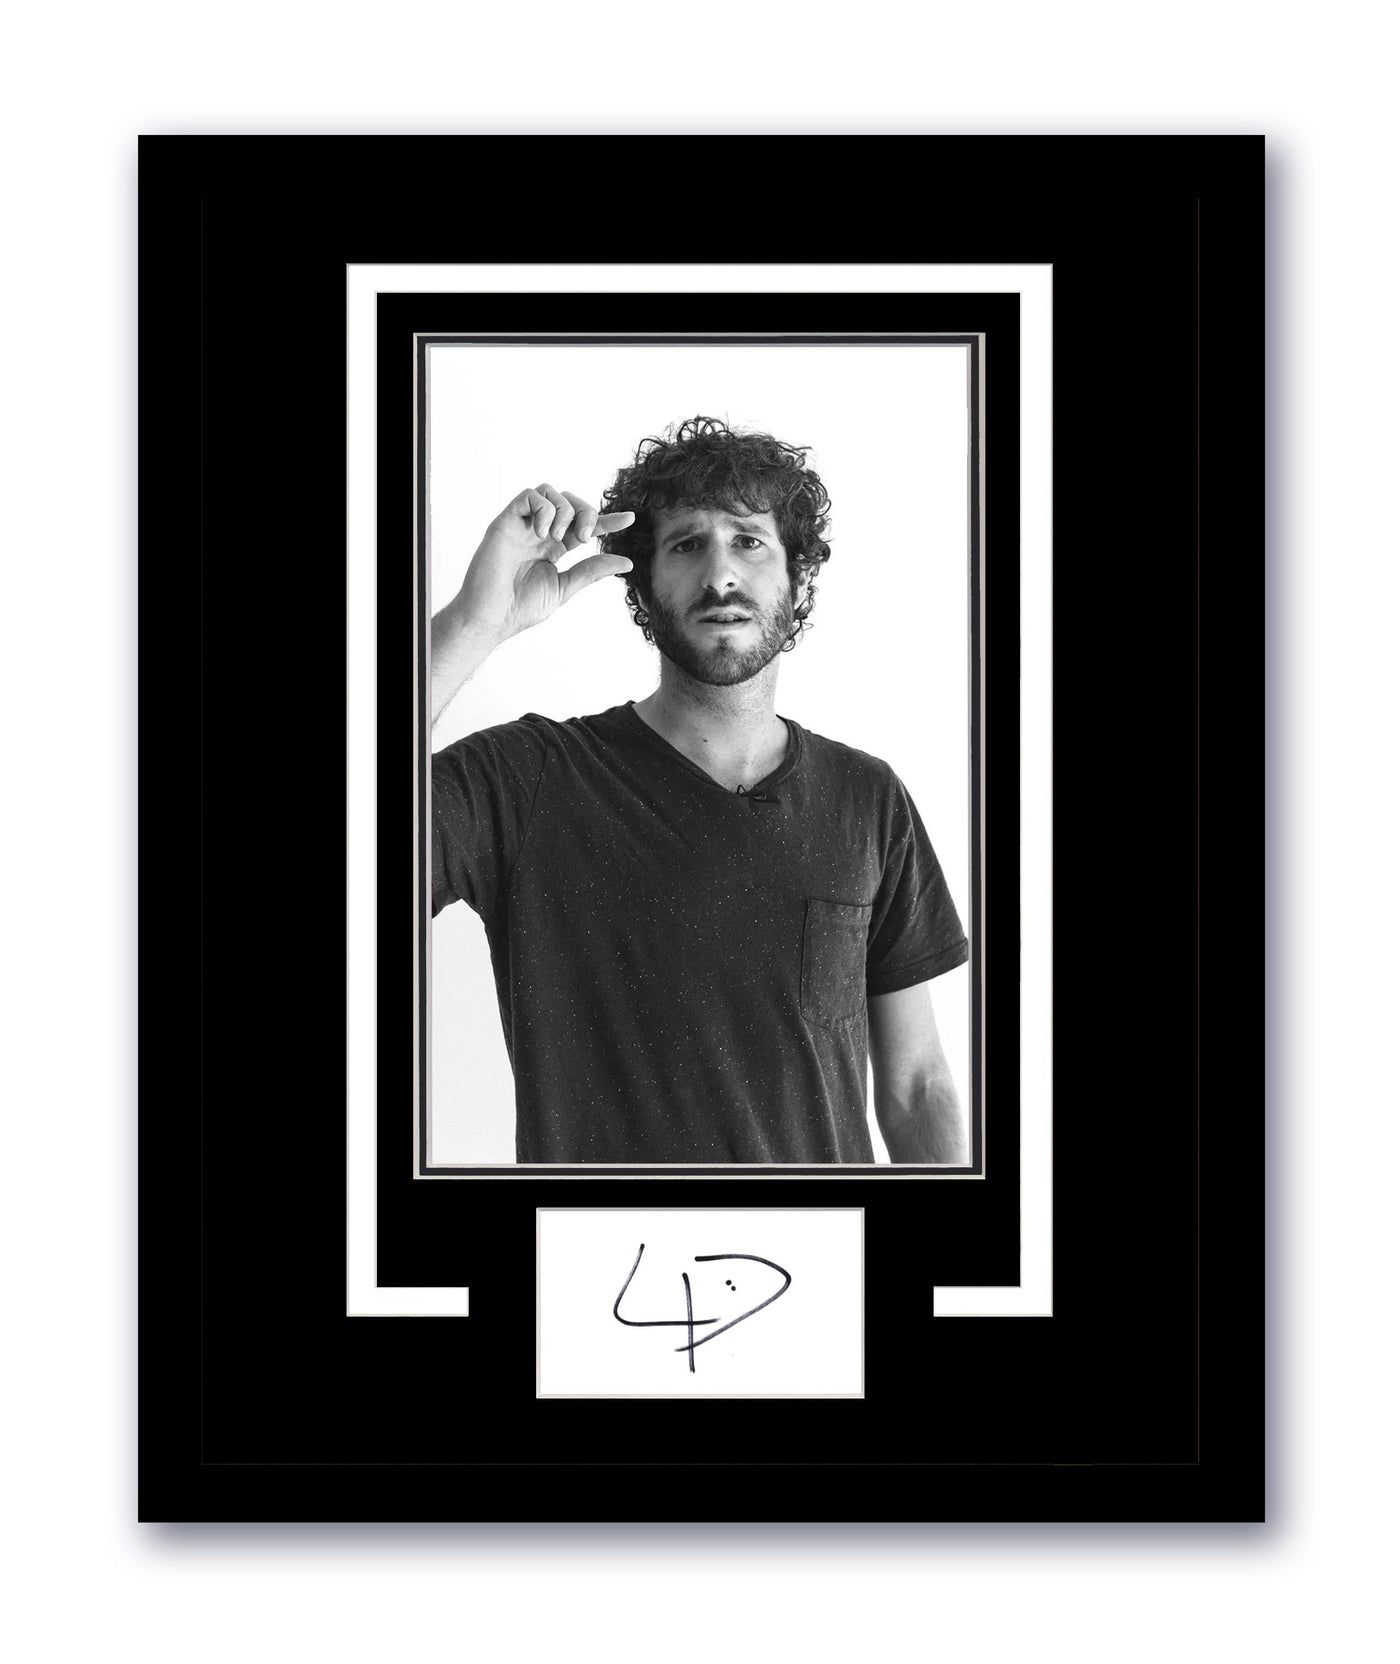 Lil Dicky Signed 11x14 Framed Photo Hip Hop Music Autographed AutographCOA